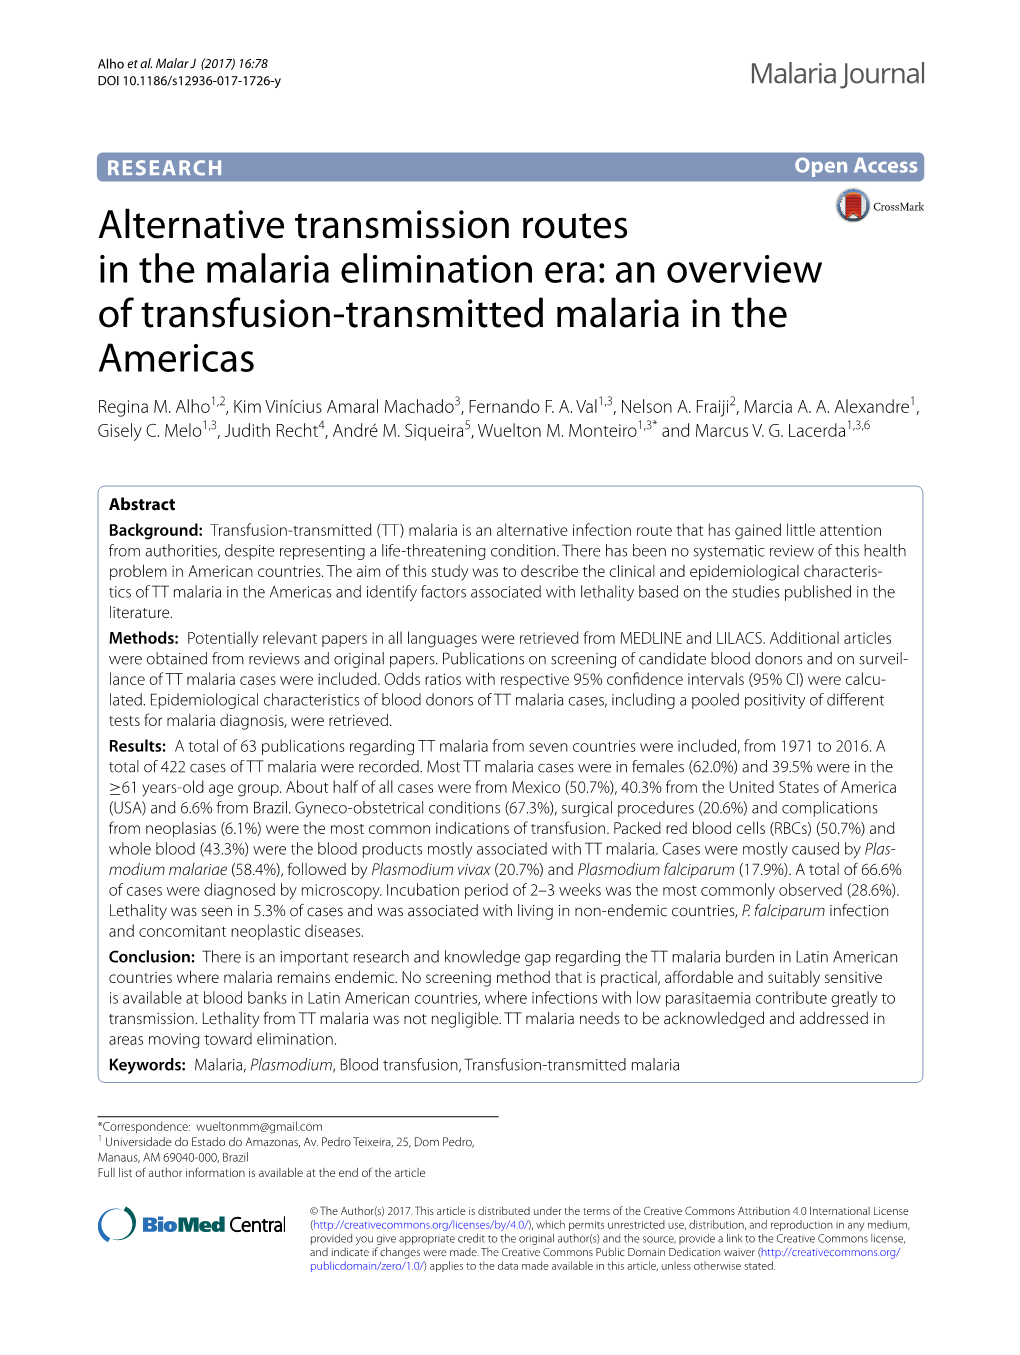 An Overview of Transfusion-Transmitted Malaria in the Americas